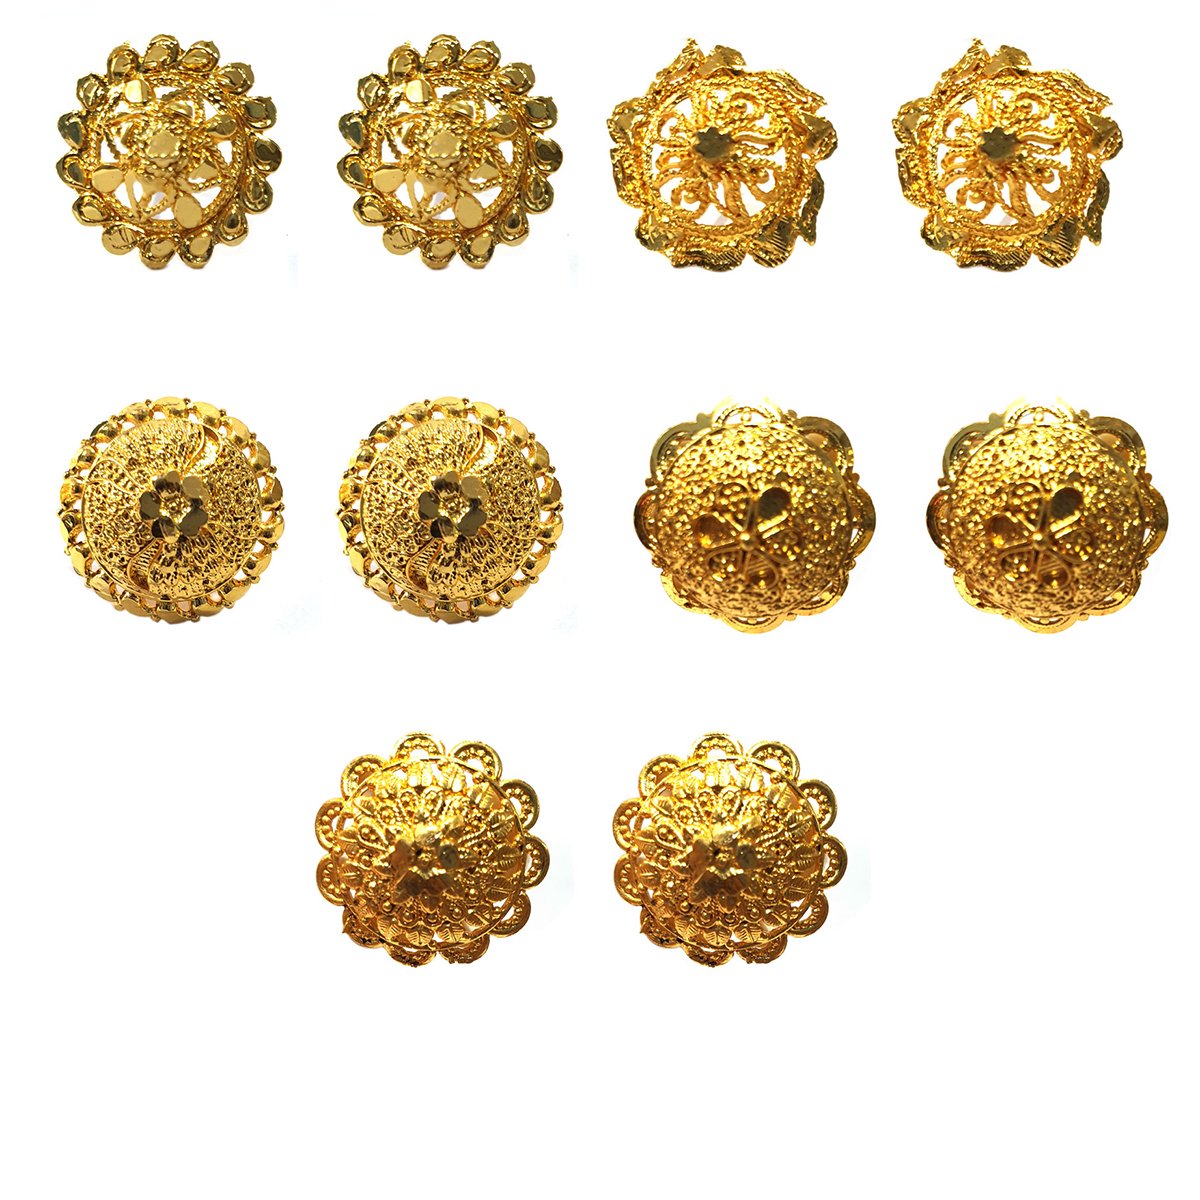 Combo Pack Of 5 Pairs Of Earrings, Gold, Silver Hot and Bold TrendsTops Earring for Girls & Women